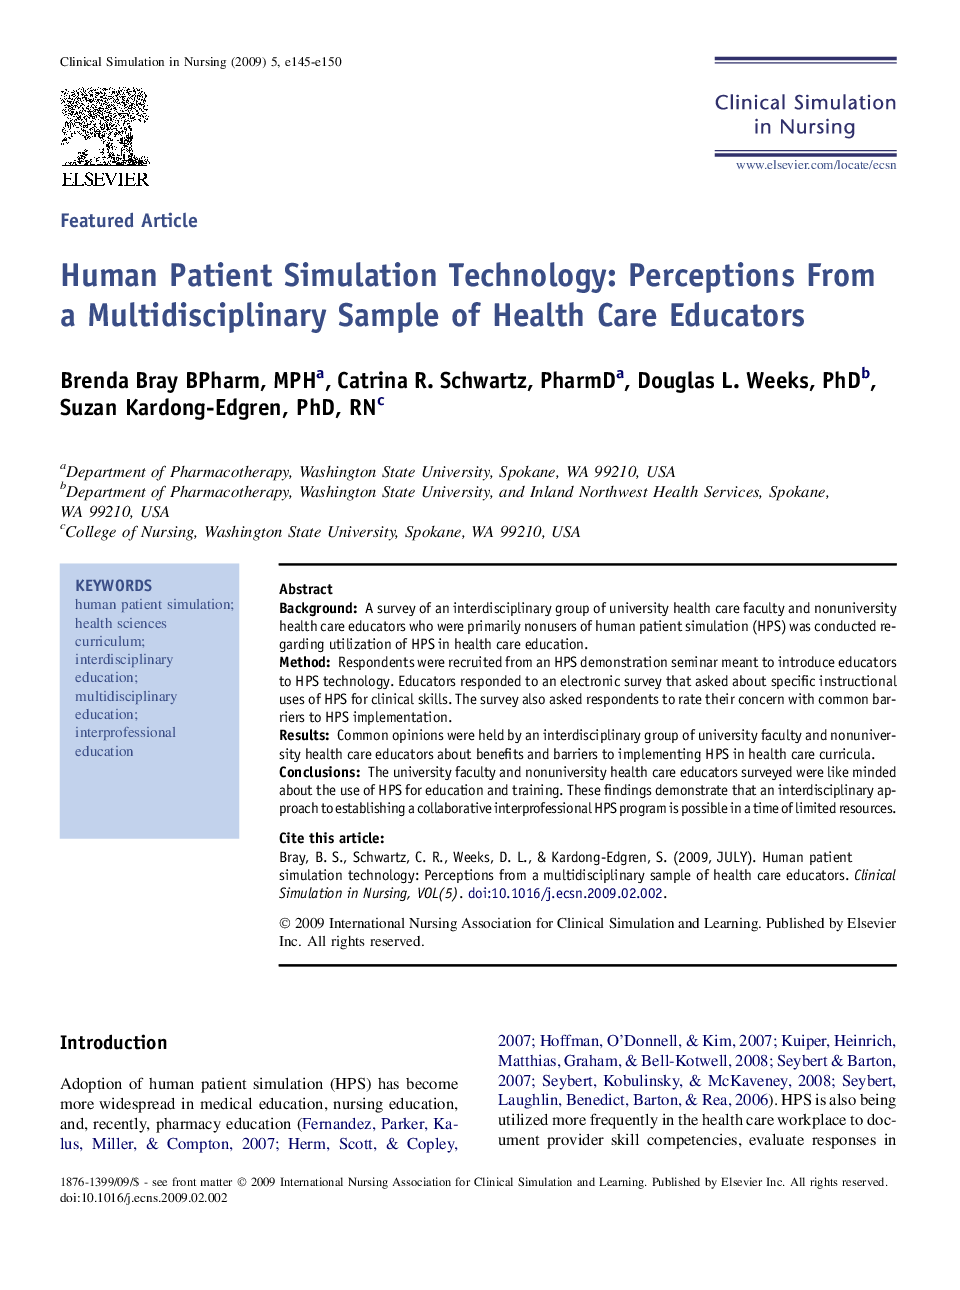 Human Patient Simulation Technology: Perceptions From a Multidisciplinary Sample of Health Care Educators 